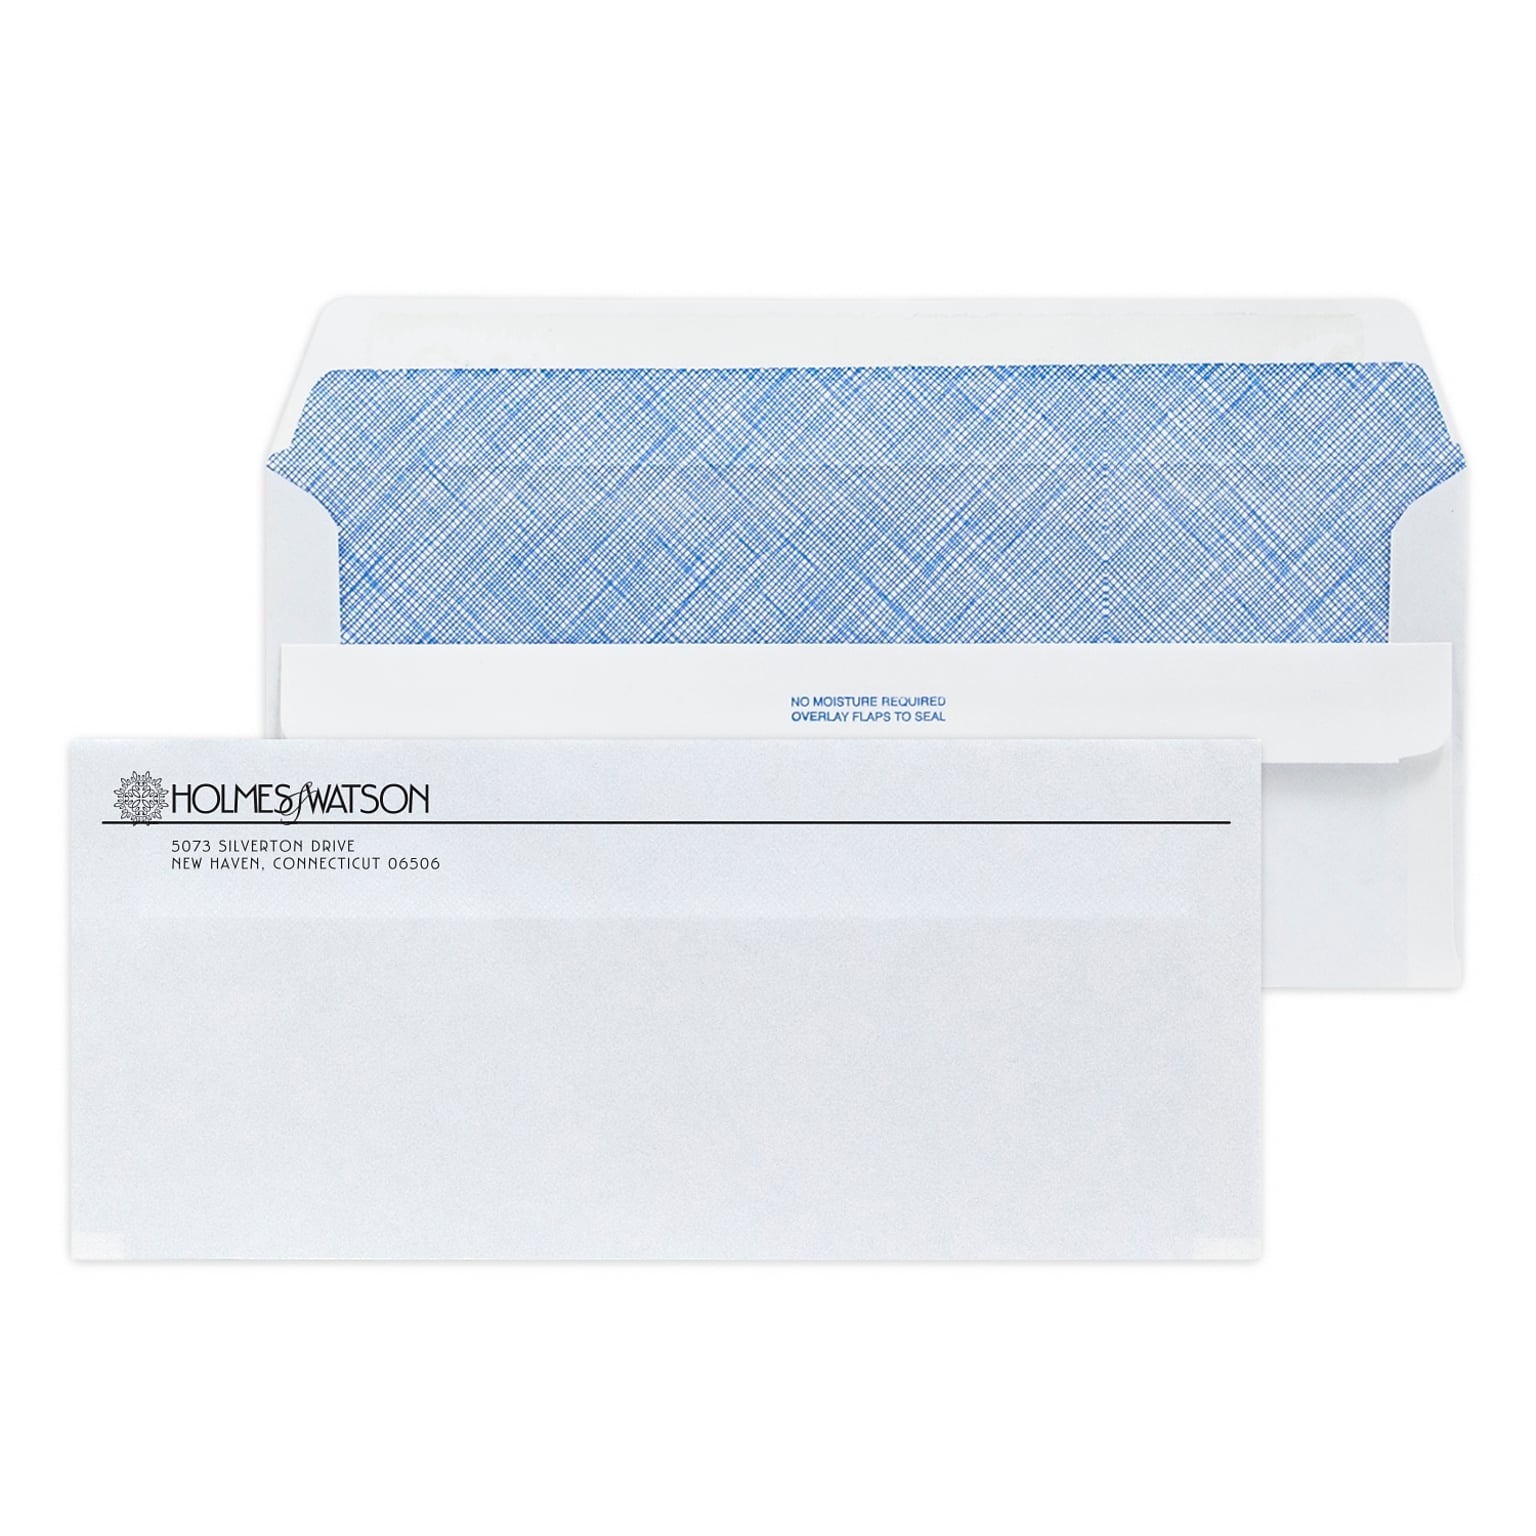 Custom #10 Self Seal Envelopes with Security Tint, 4 1/4 x 9 1/2, 24# White Wove, 1 Standard Ink, 250 / Pack